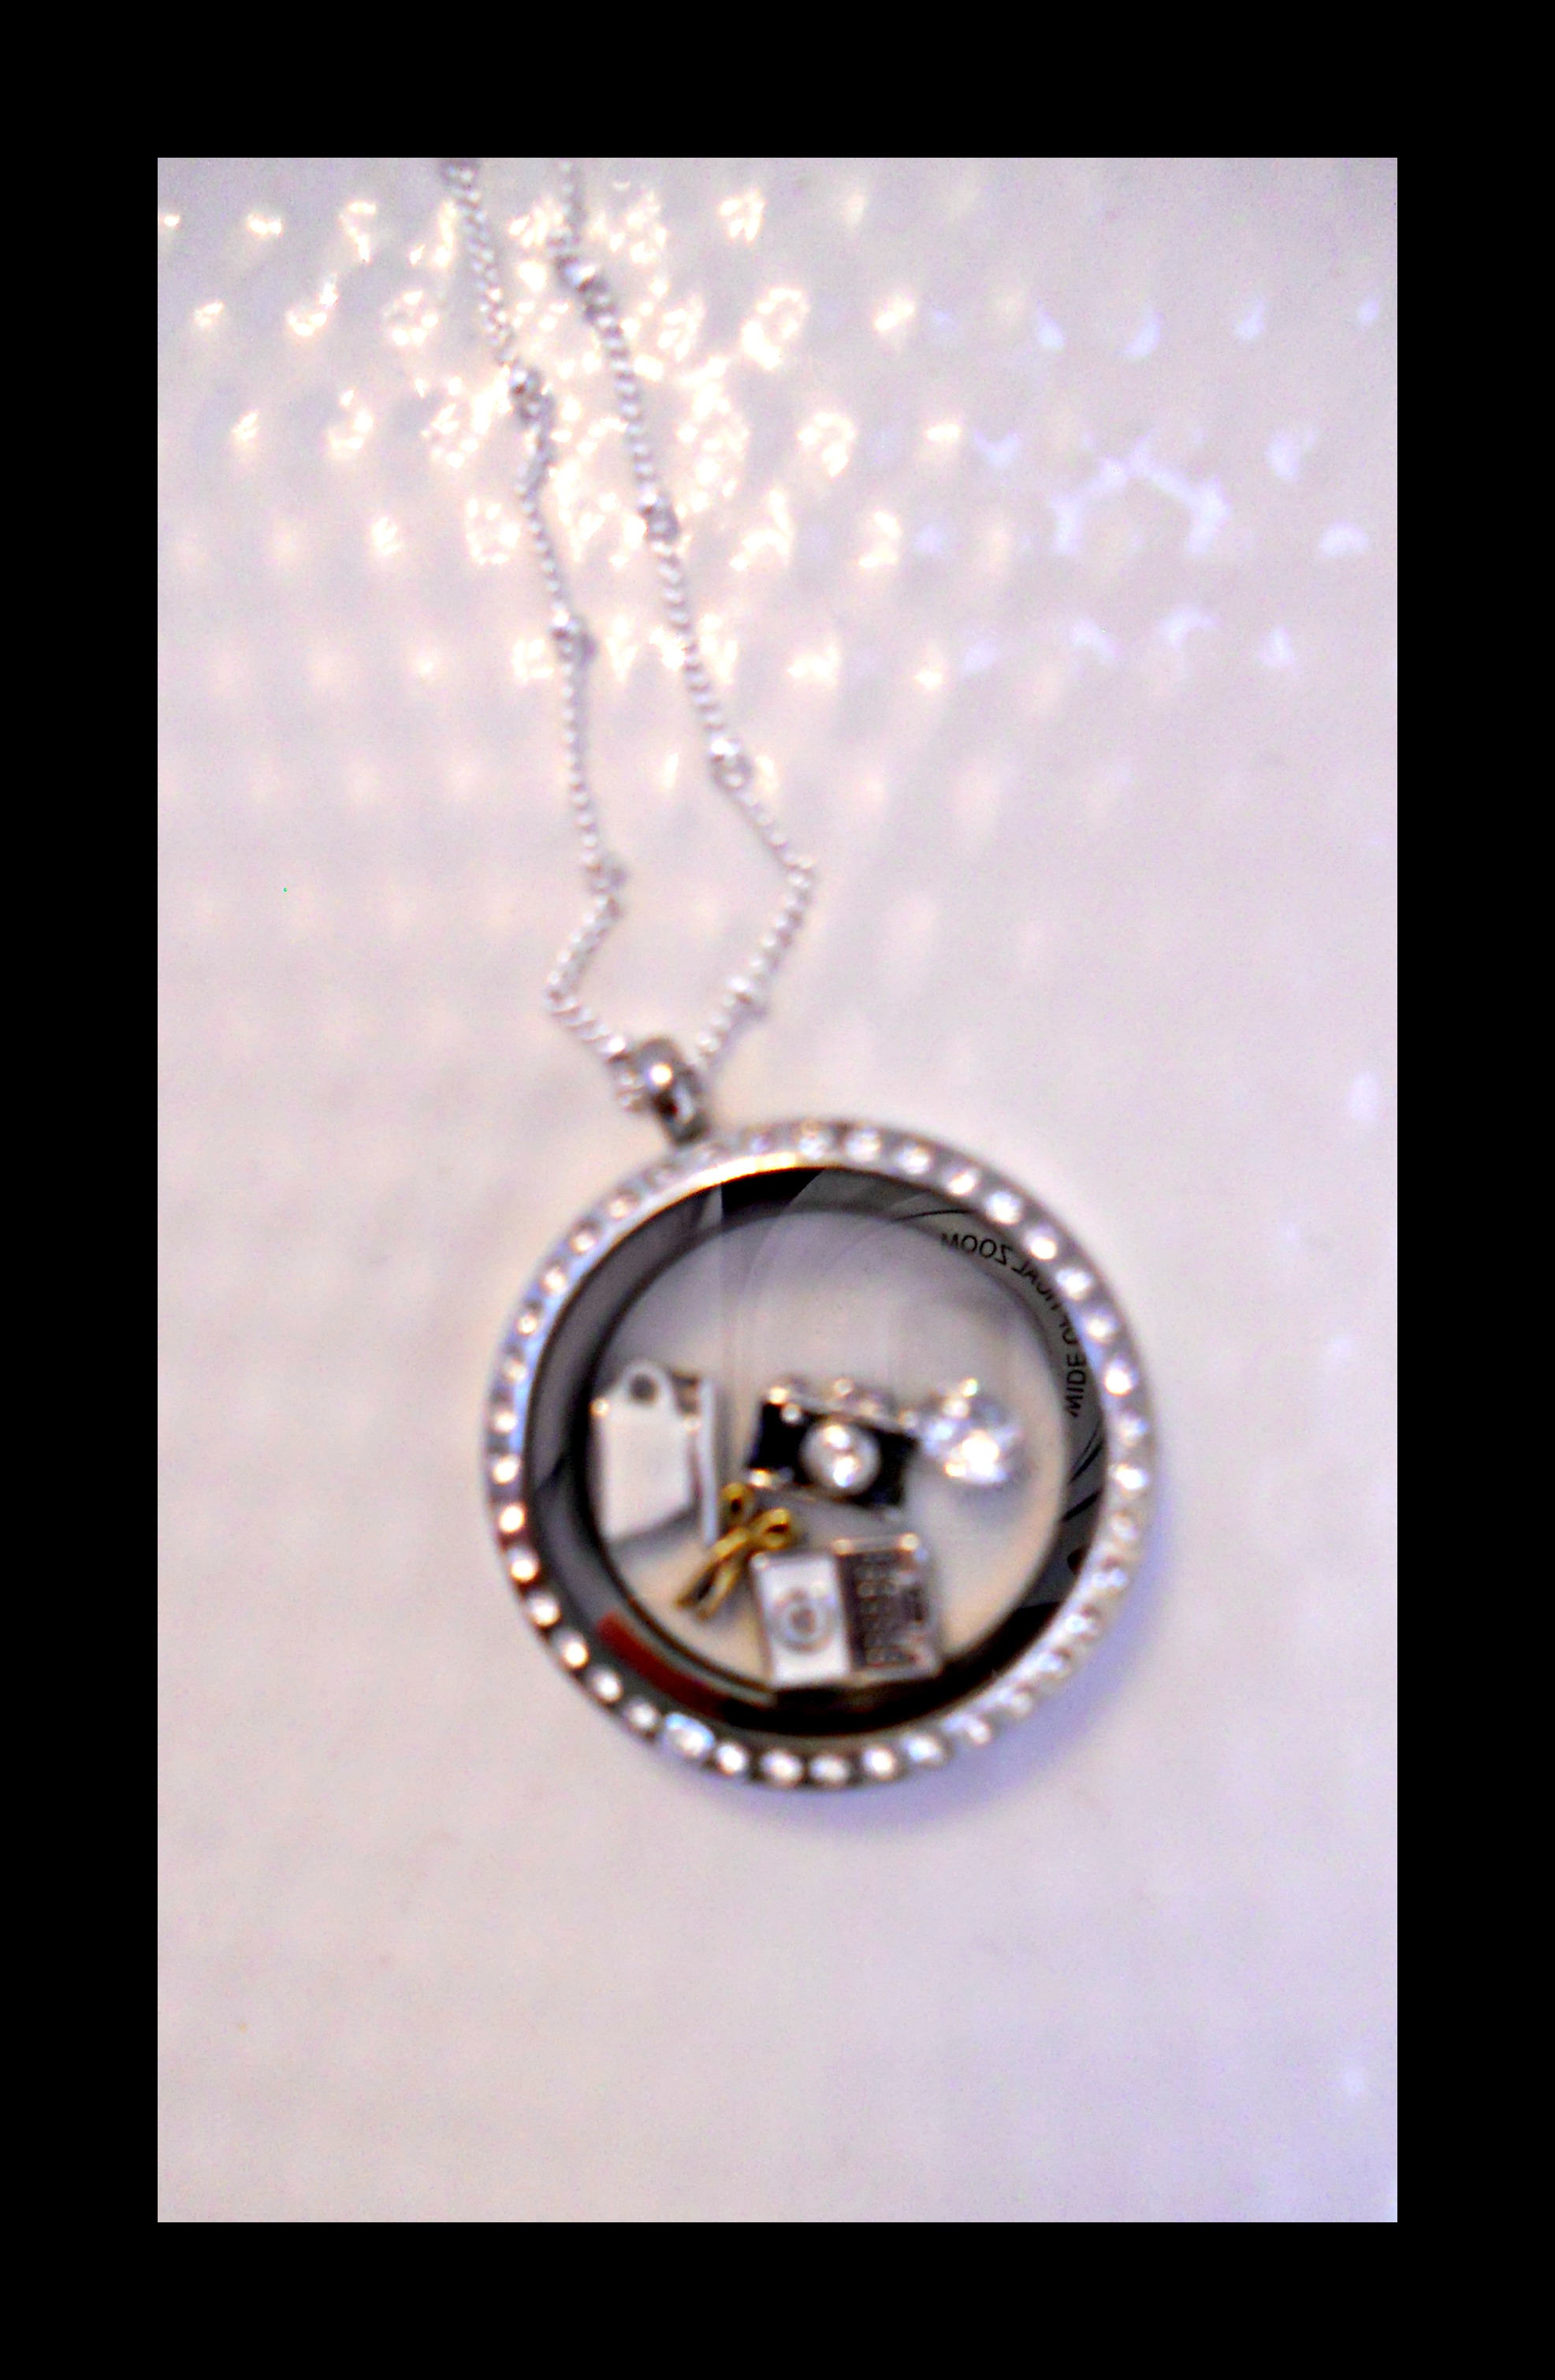 Origami Owl Locket Ideas Blogger Locket Giveaway Hmmm Wish I Could Win This